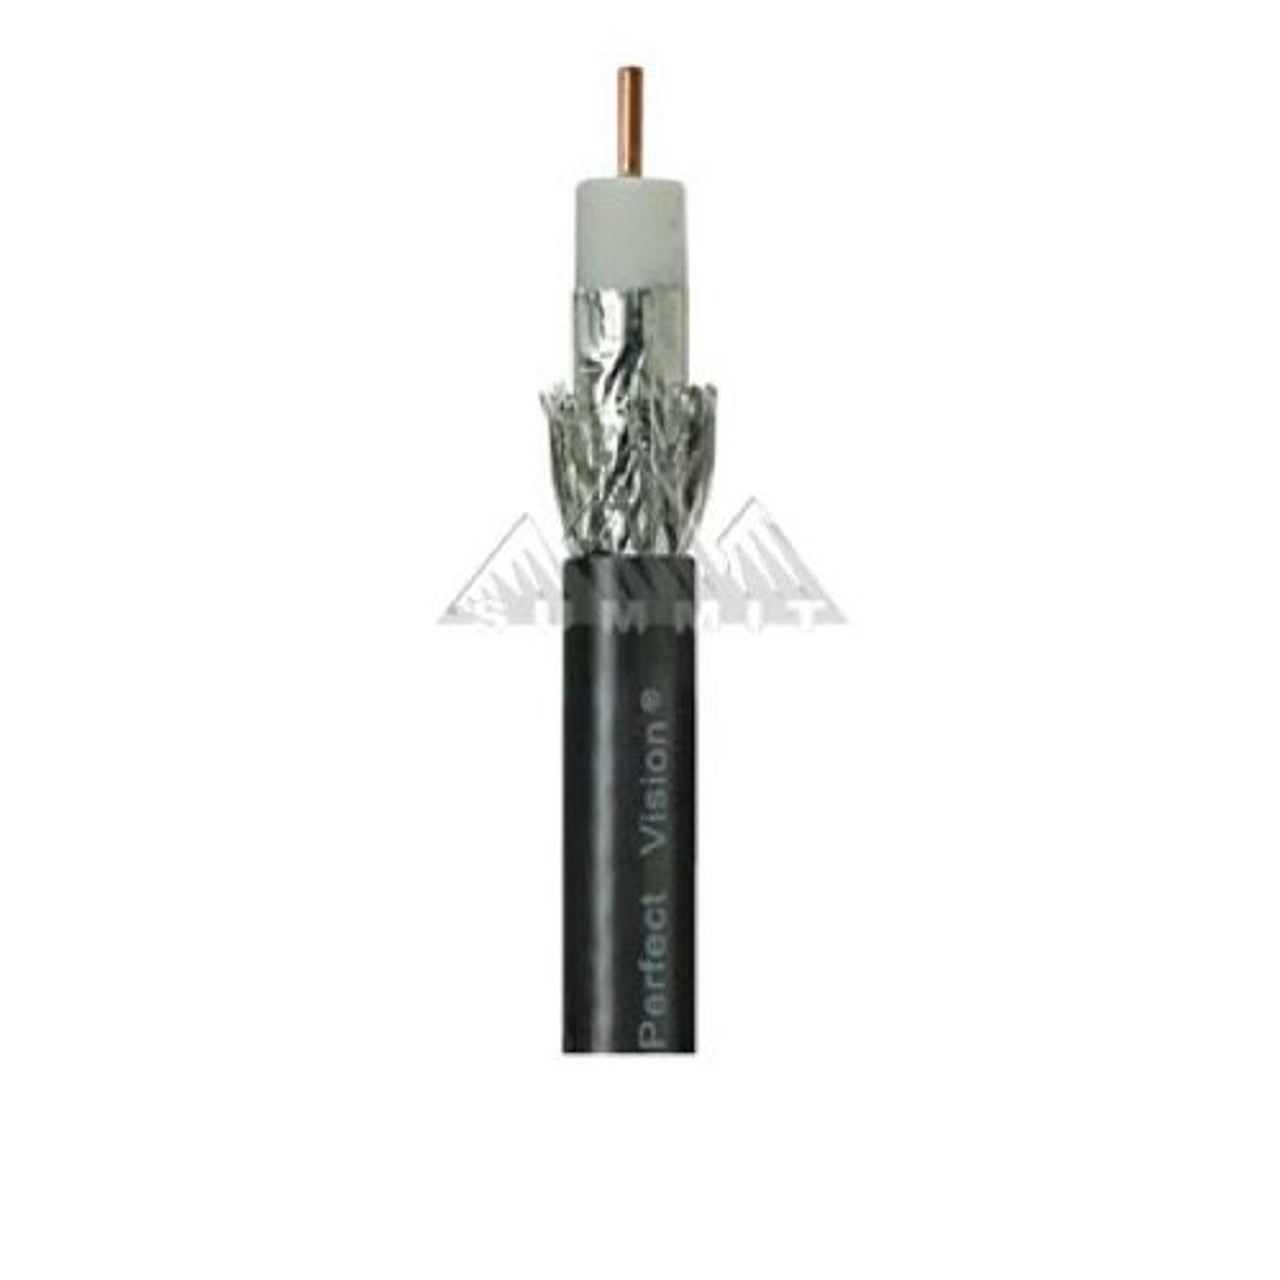 DirecTV CB1B06DSCR0-05 RG6 Coaxial Cable Black 3 GHz Solid Copper DTV Approved